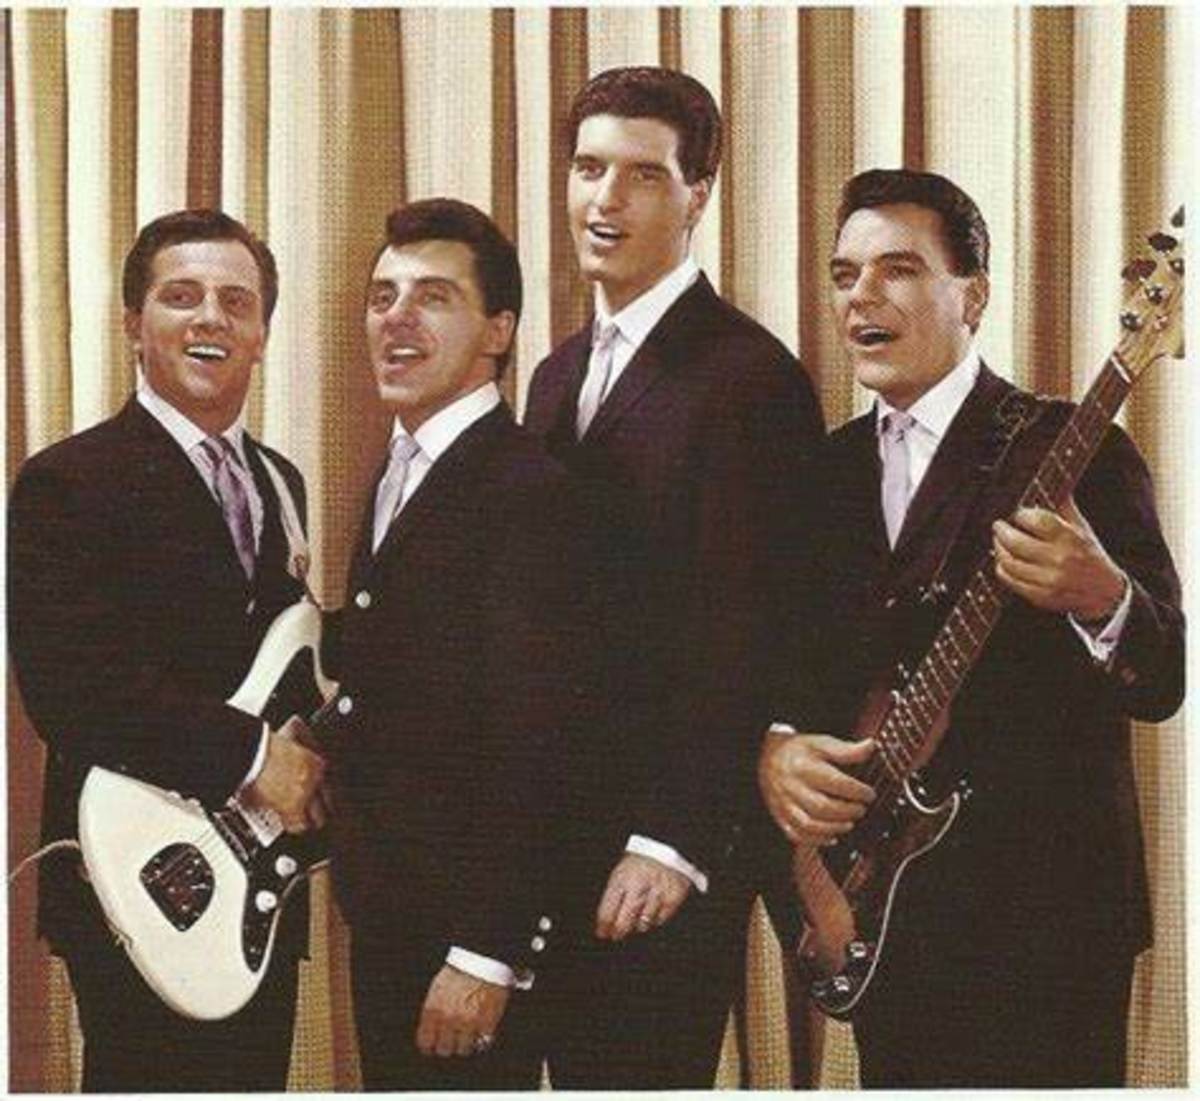 The Four Seasons Music Group of the Sixties